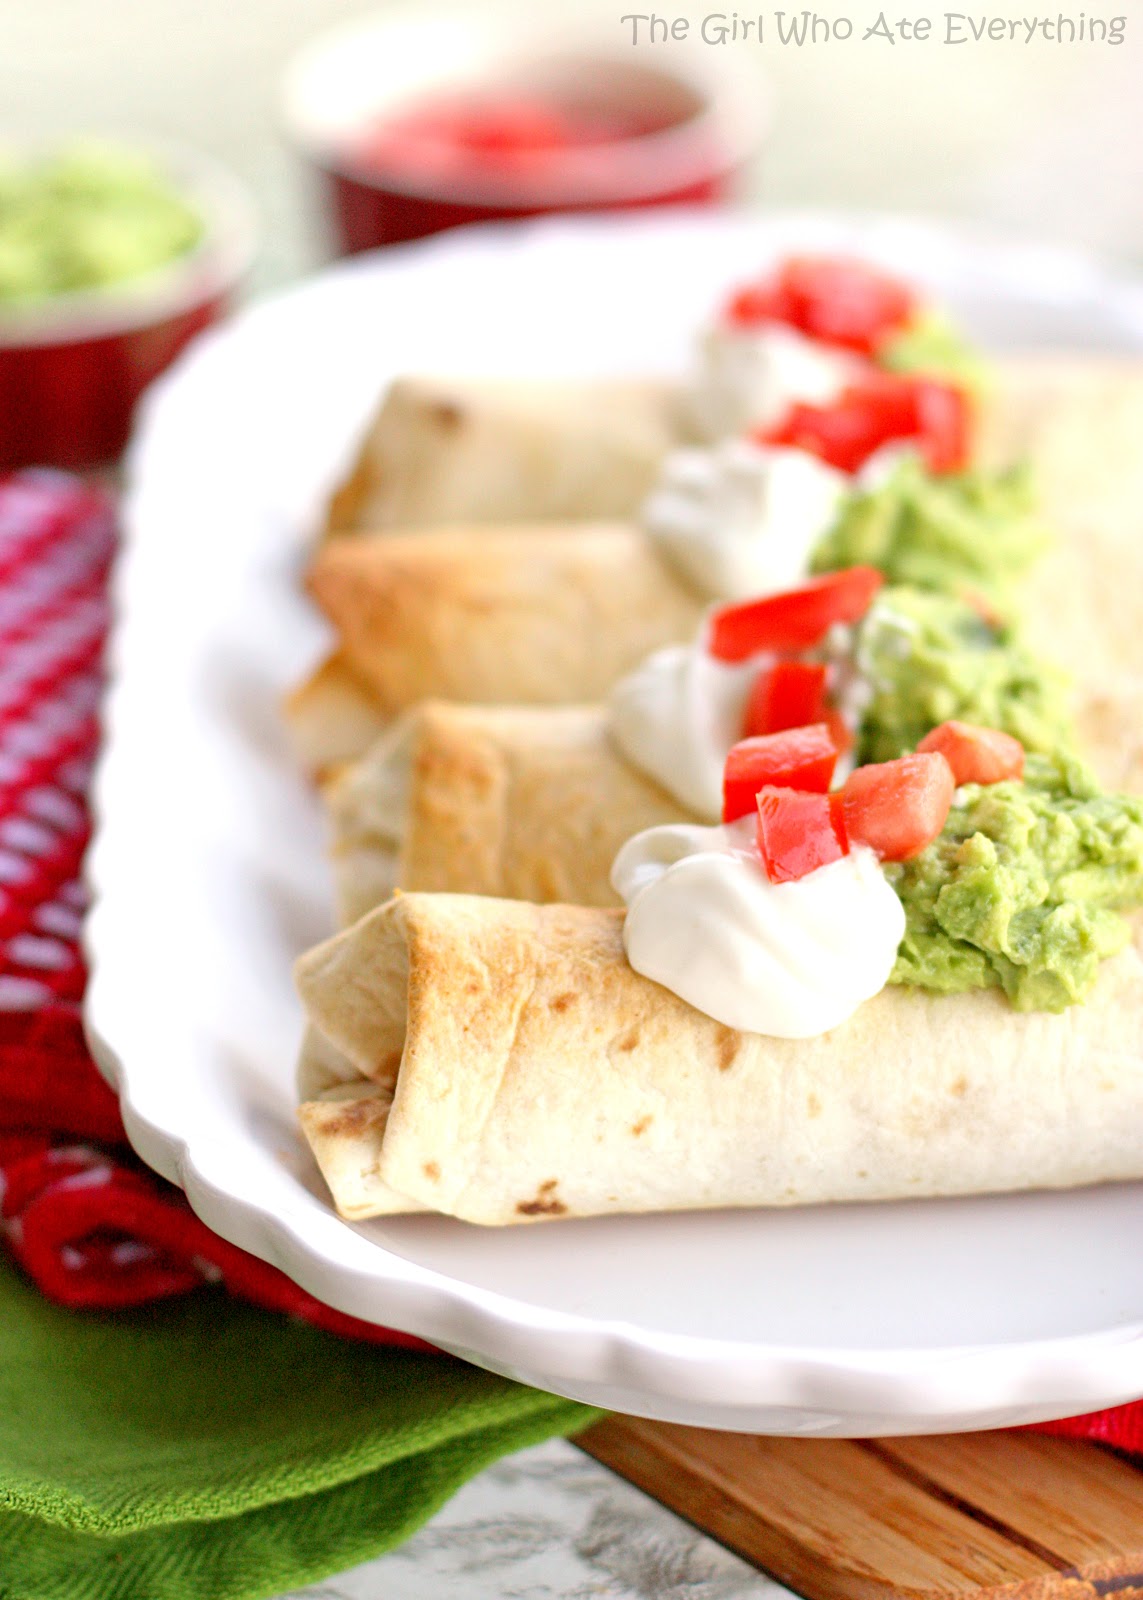 Baked Chicken Chimichangas, Recipe